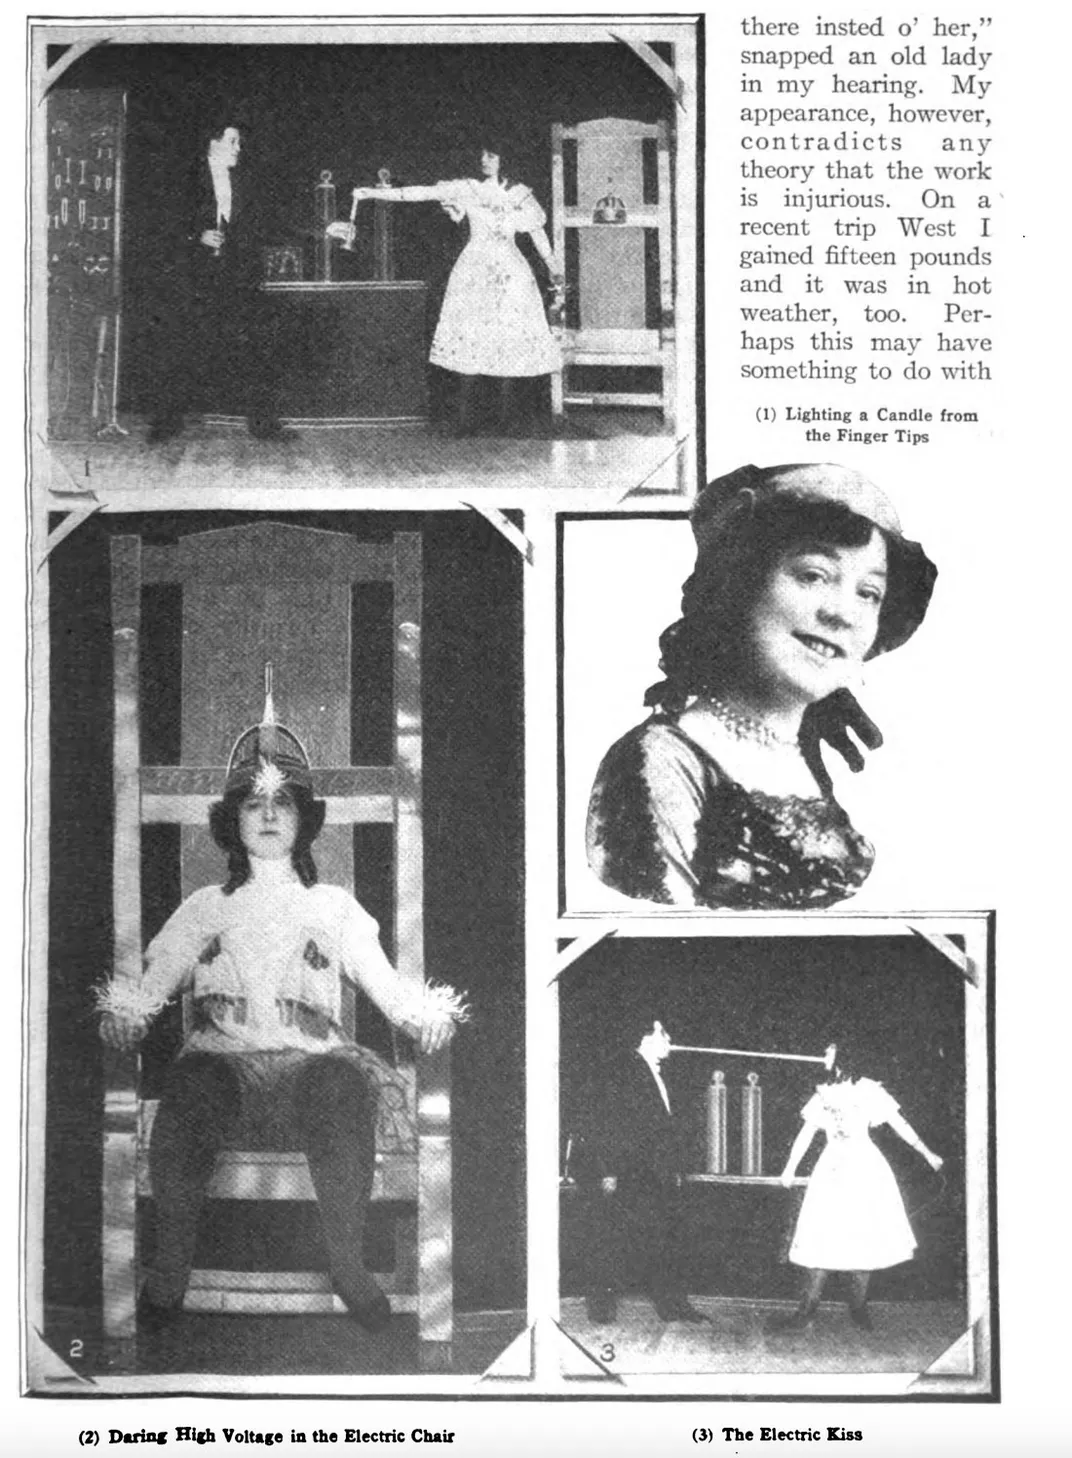 Photos from a 1913 magazine article about the sideshow performer Electrice